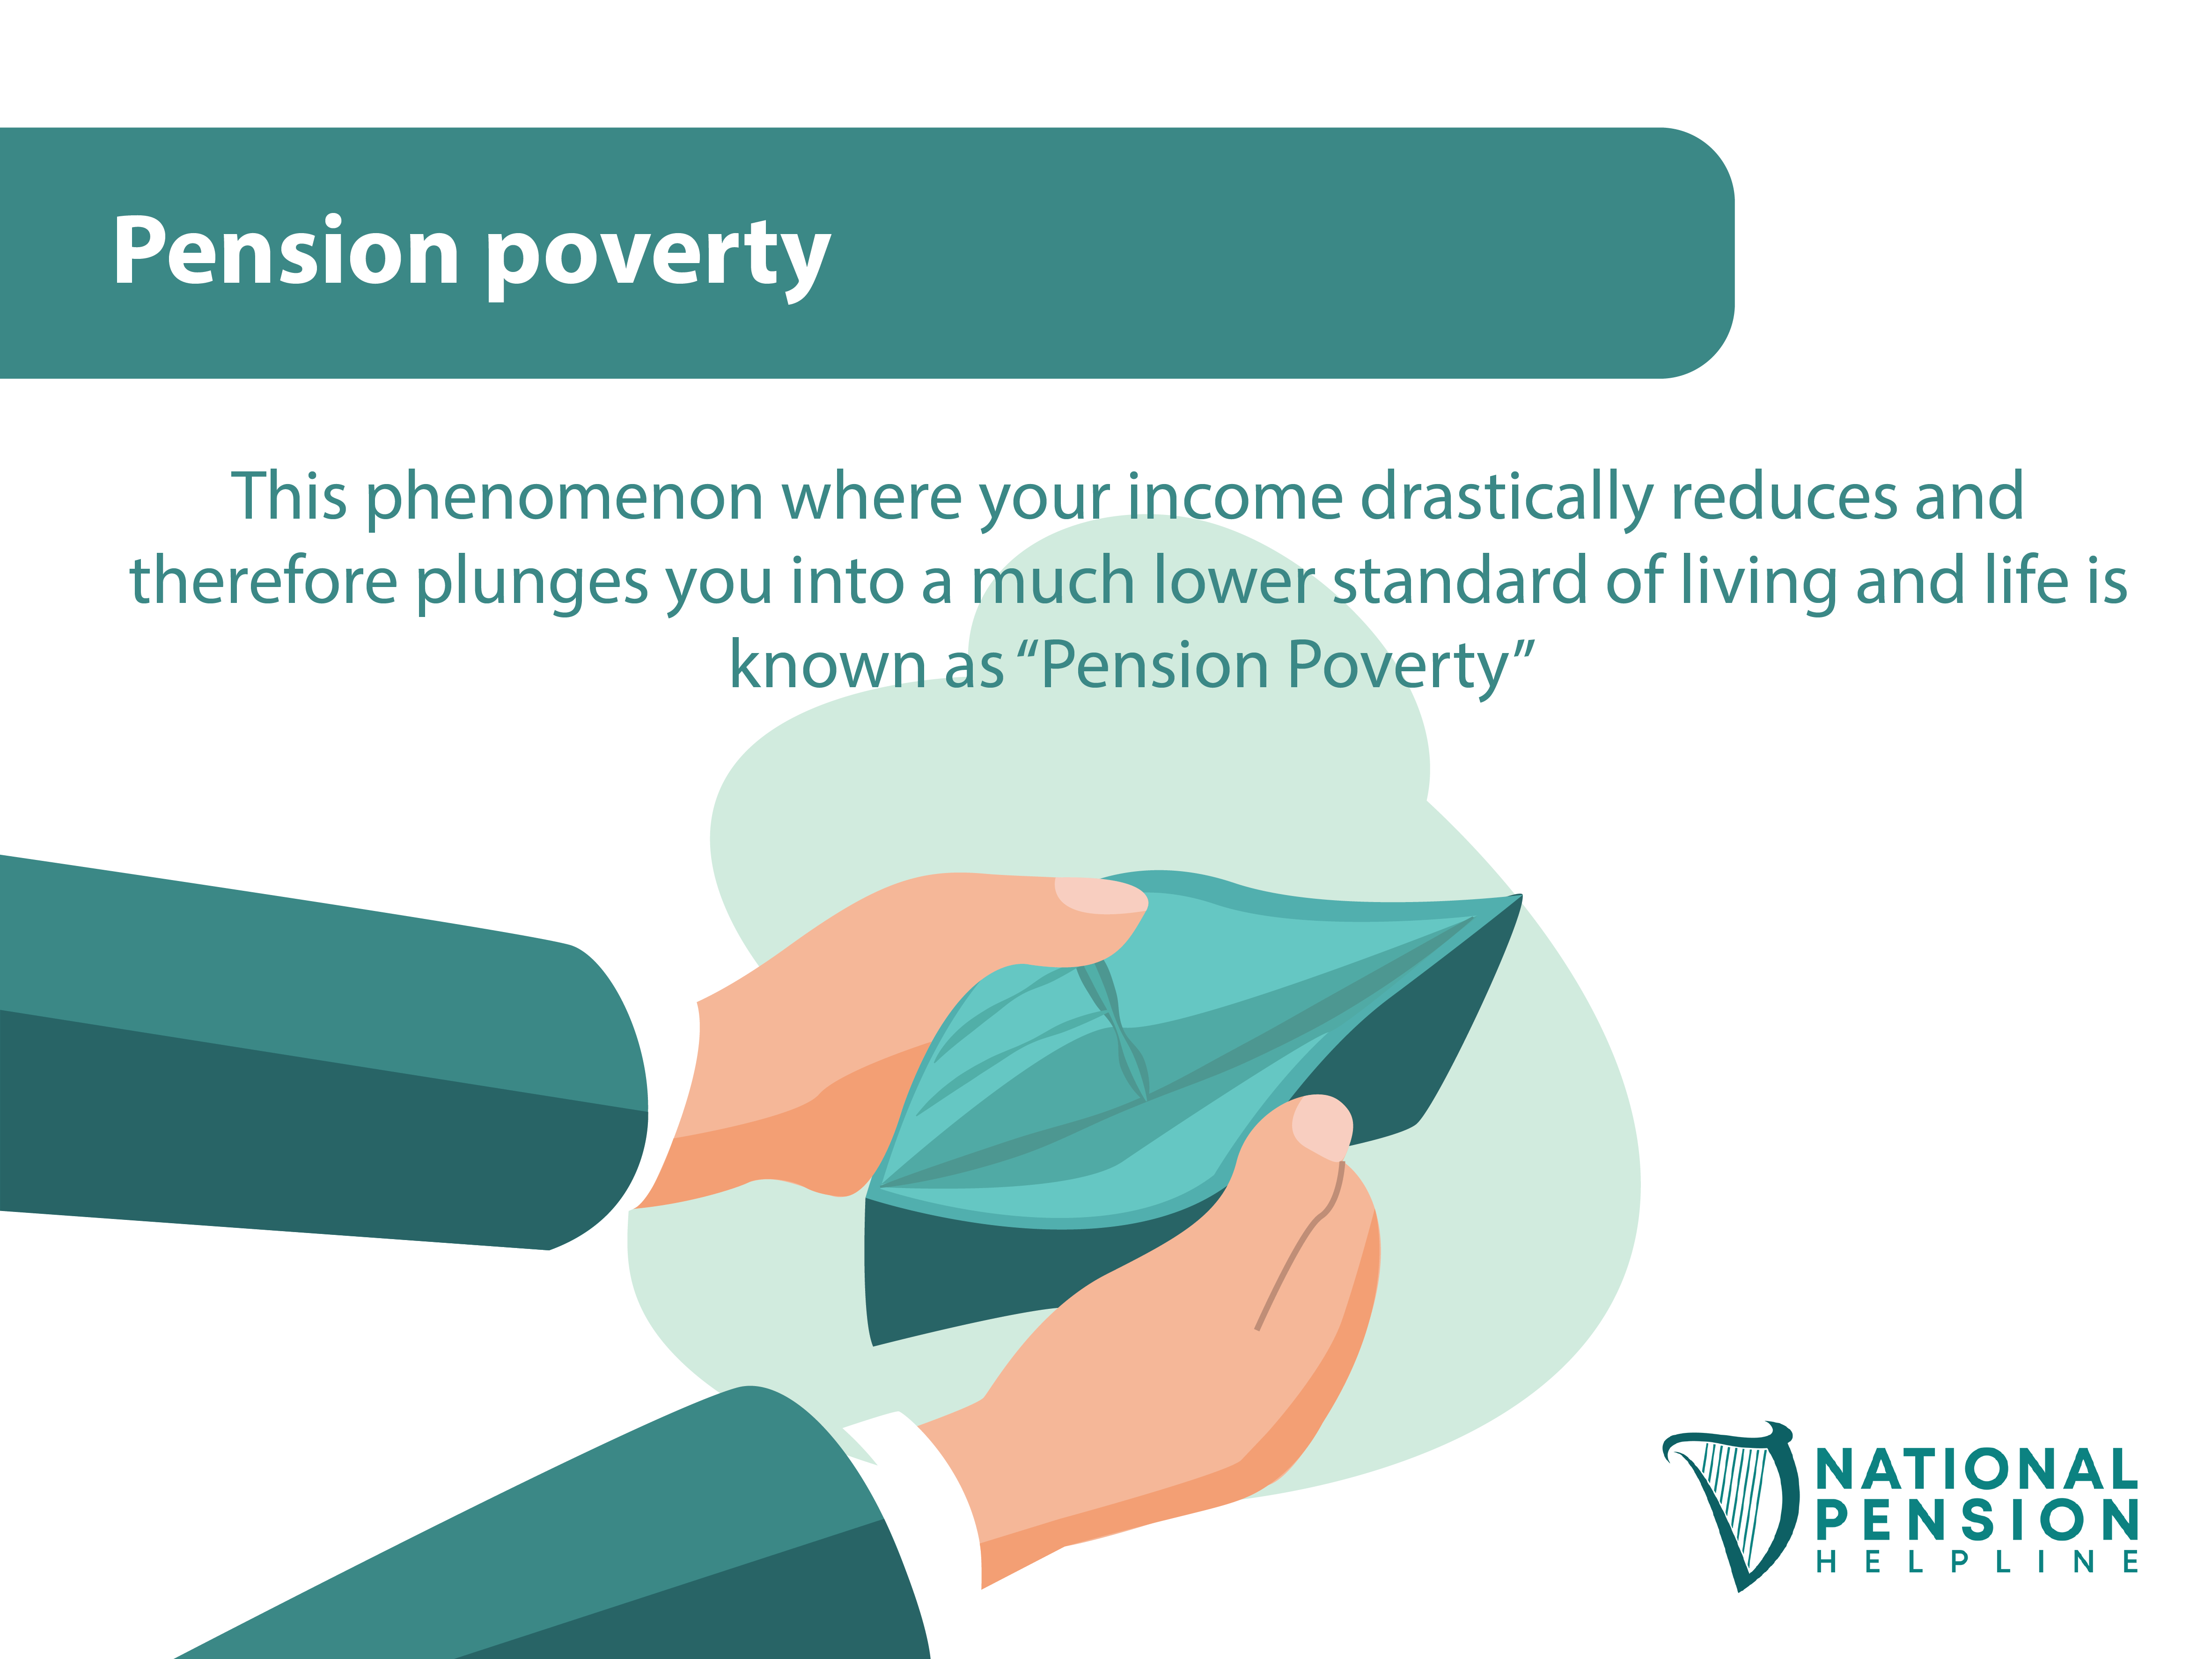 The pension poverty quote